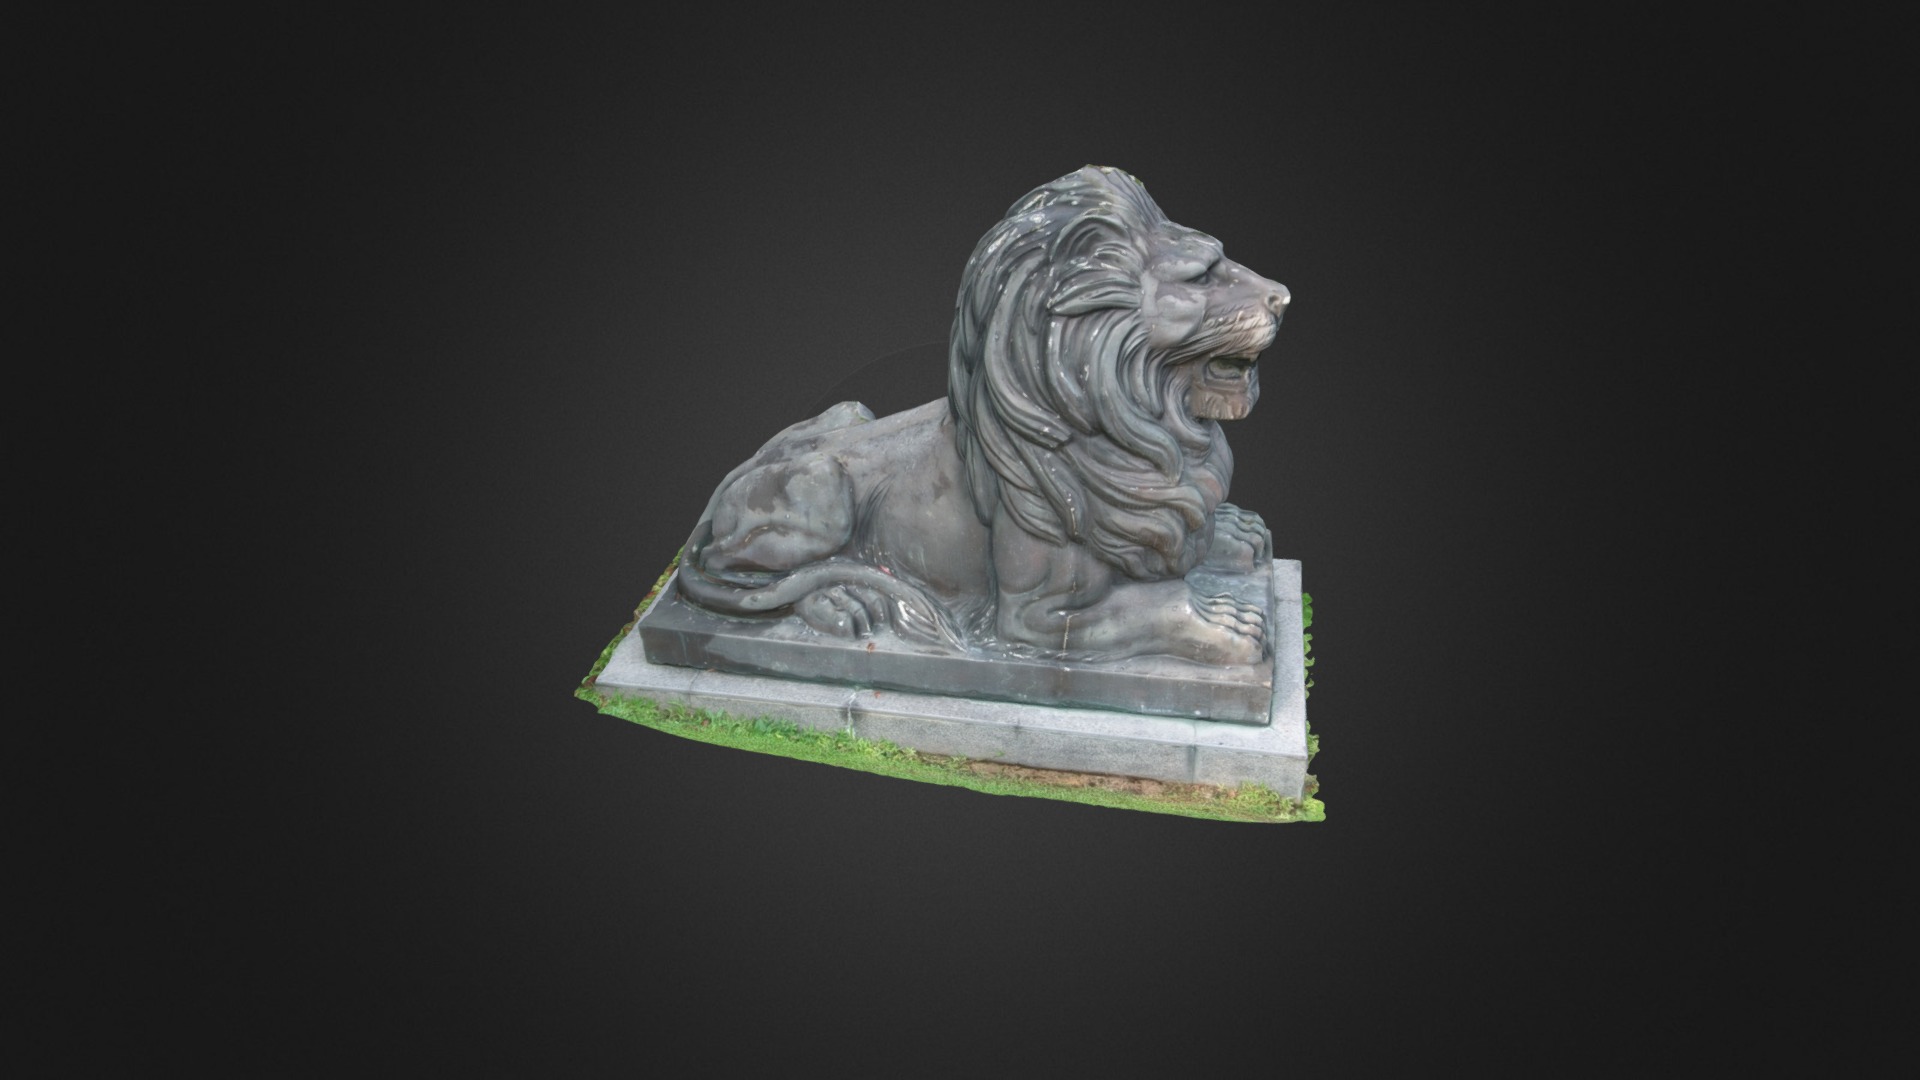 3D model Fort Canning lion - This is a 3D model of the Fort Canning lion. The 3D model is about a statue of a lion.